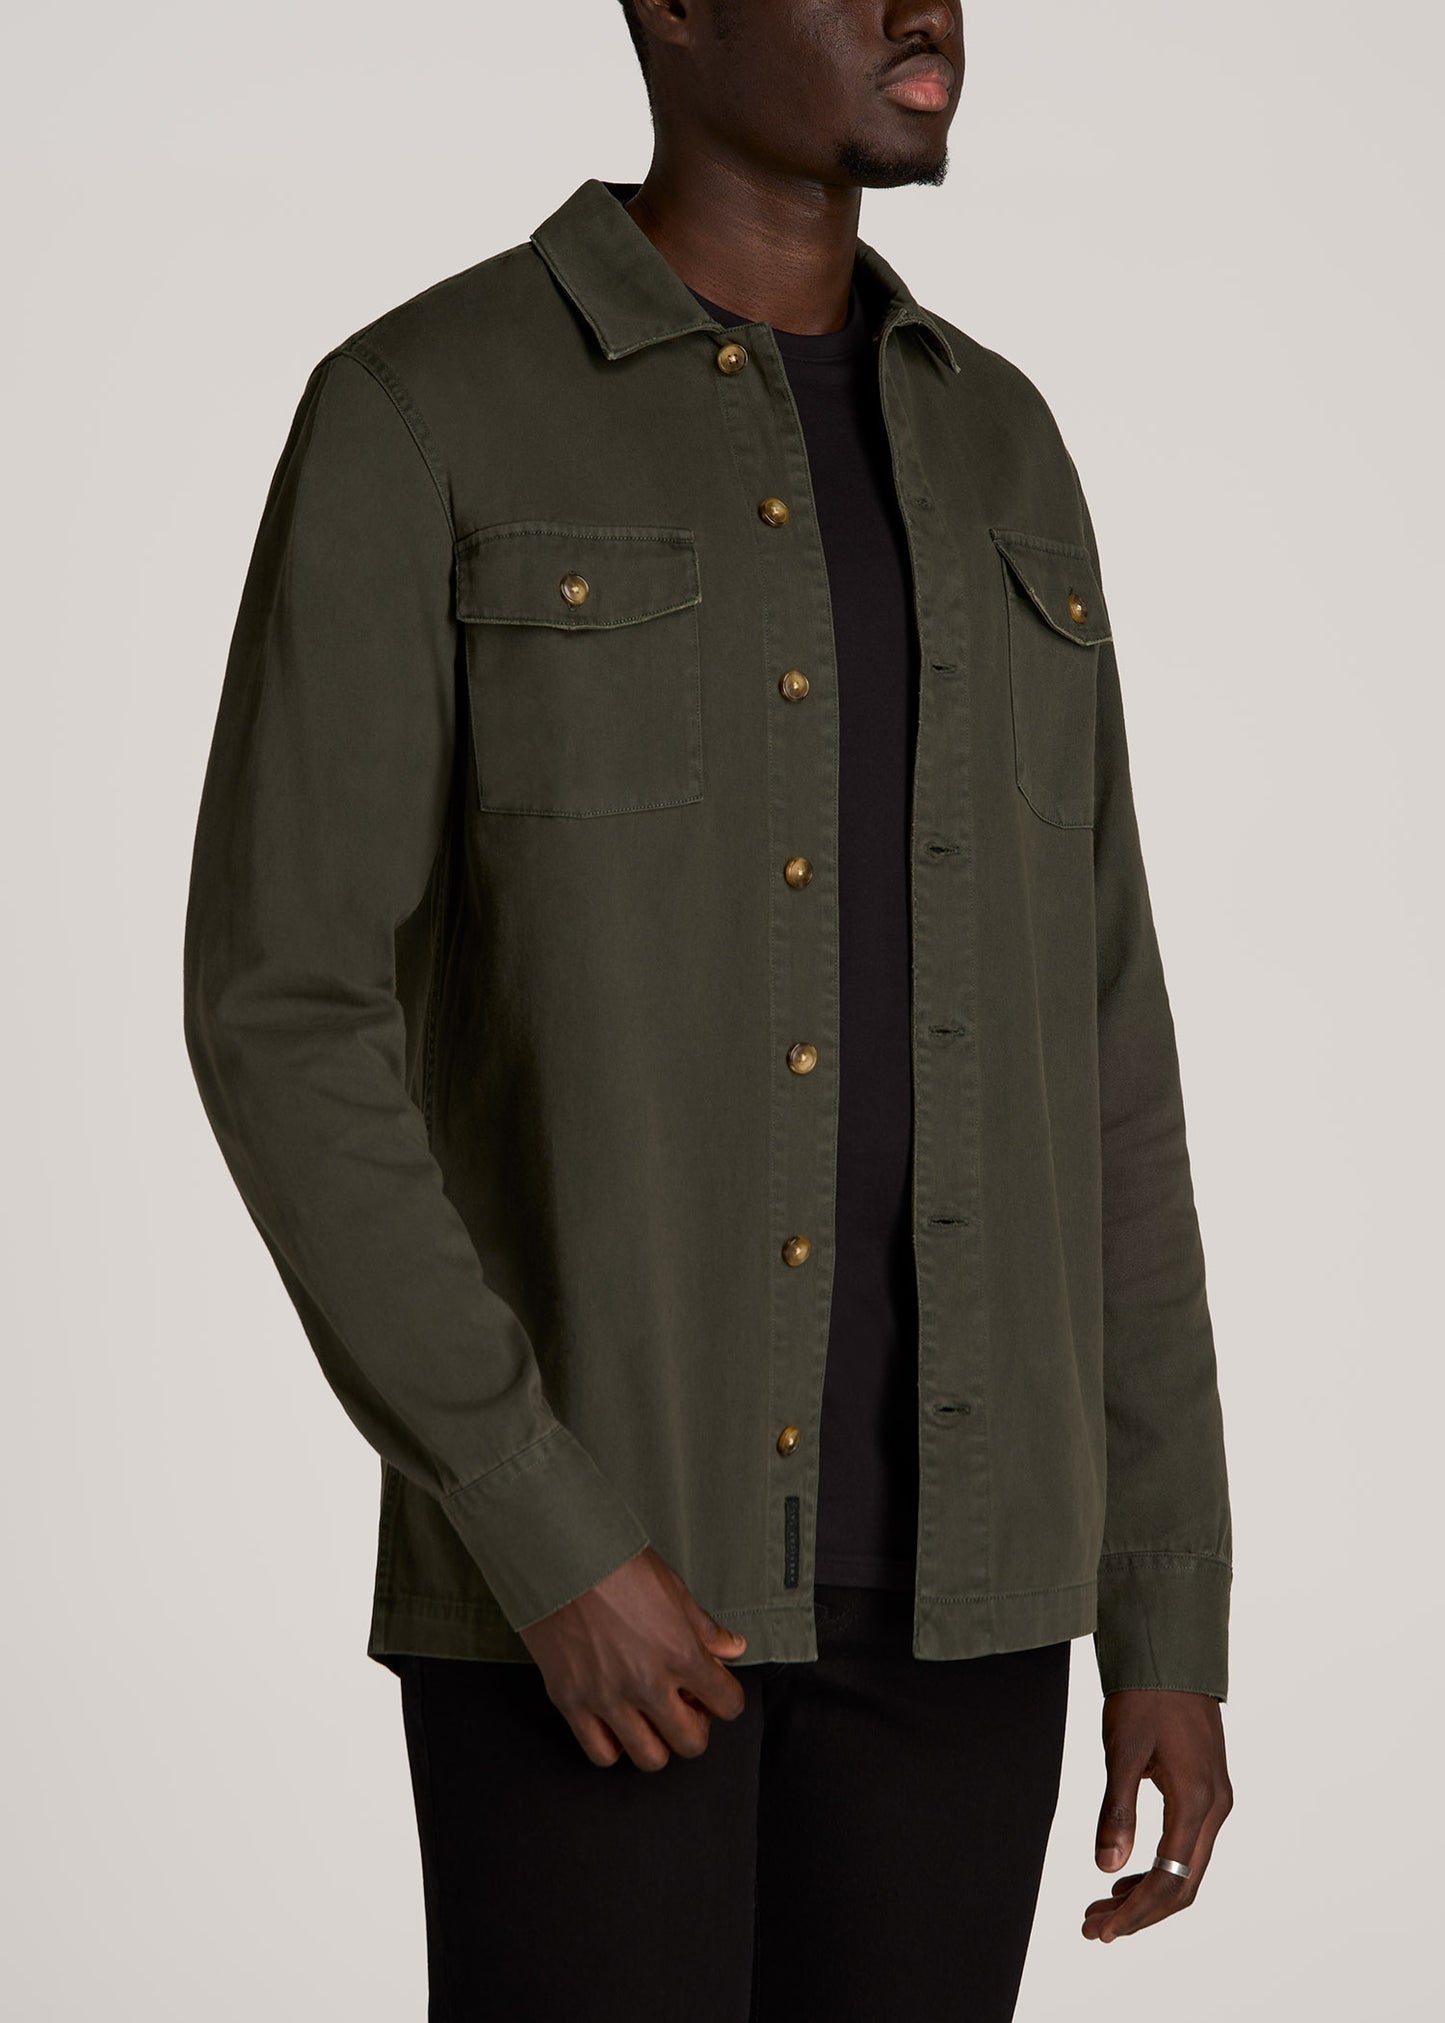 Garment Dyed Lightweight Overshirt For Tall Men in Spring Olive